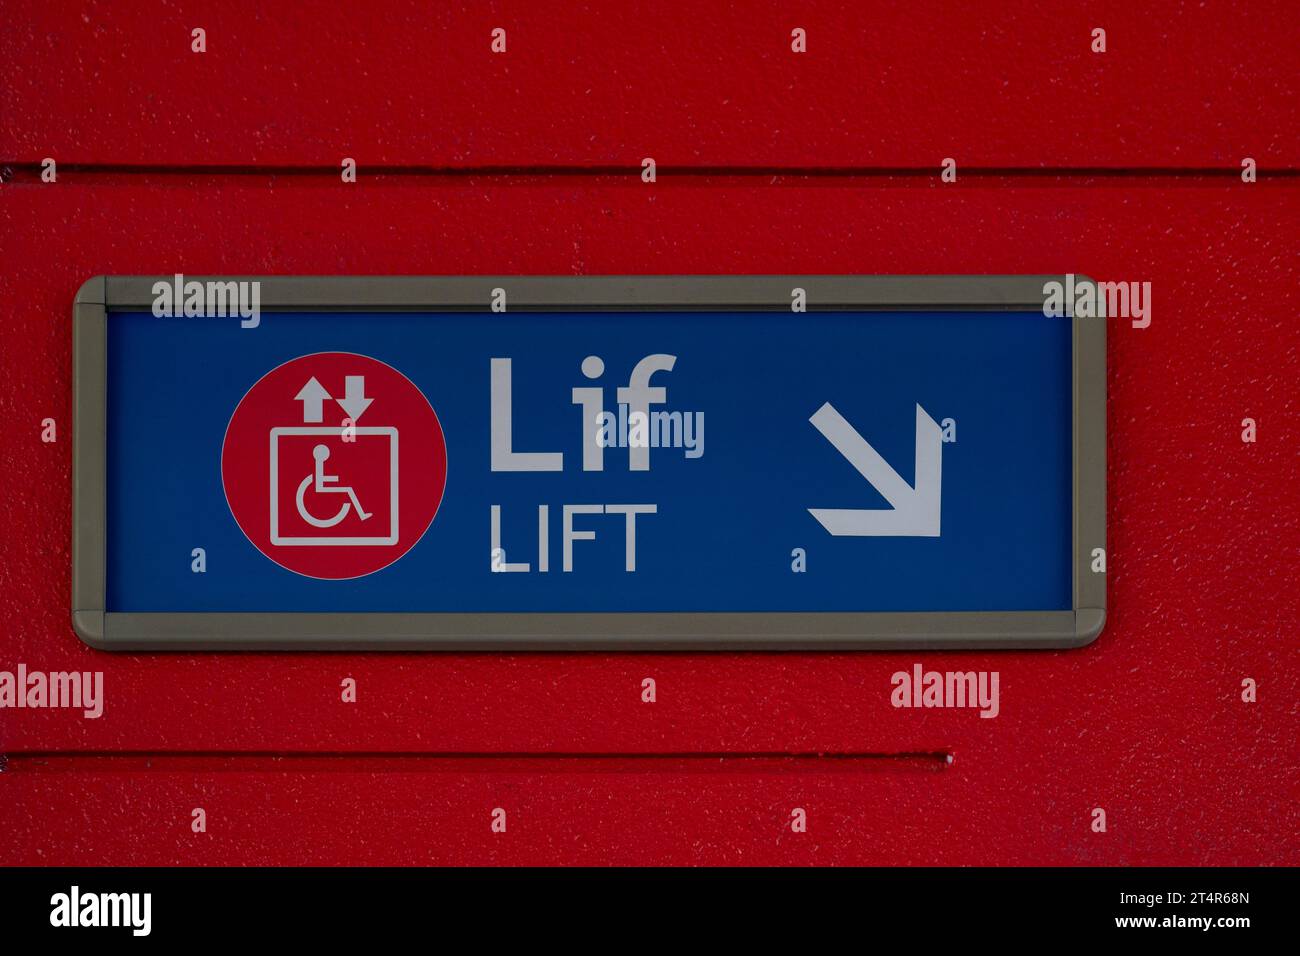 Symbol or Signage of elevator for disabled logo on red background Stock Photo